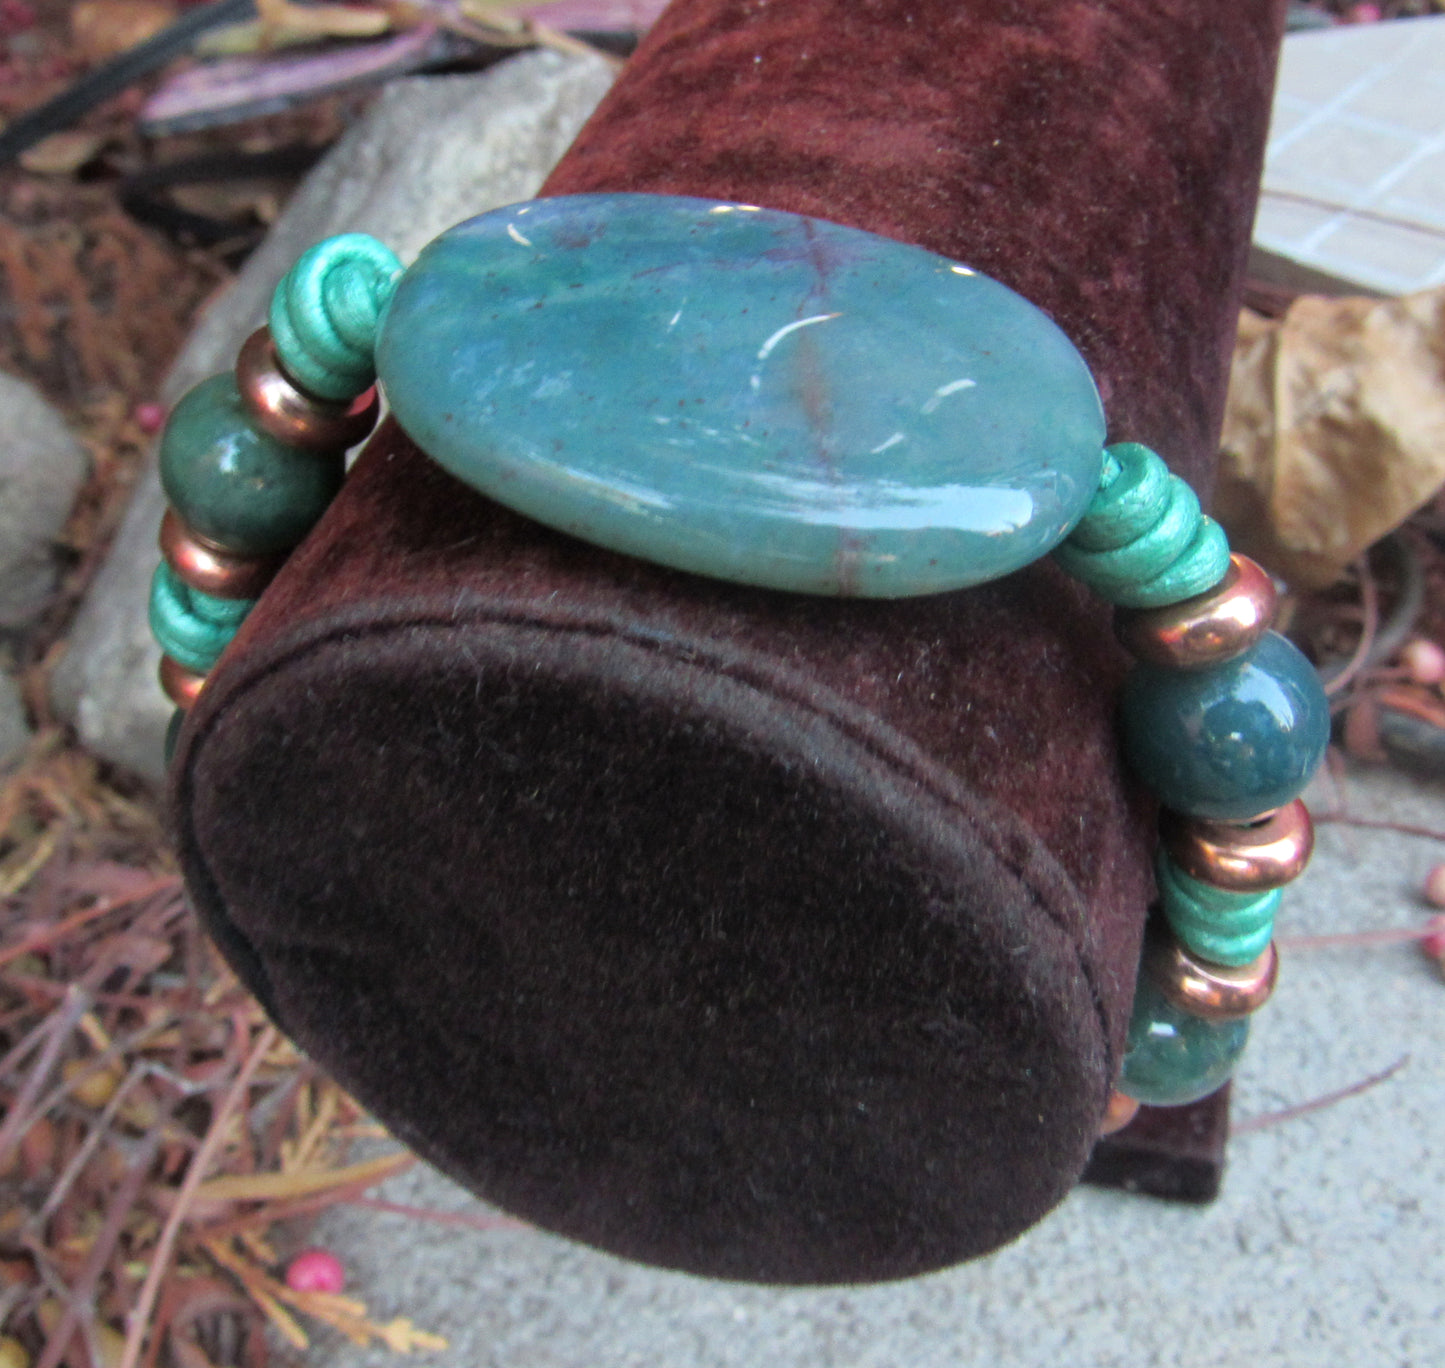 Natural Indian Agate gemstone and Copper Hand Knotted Leather Bracelet